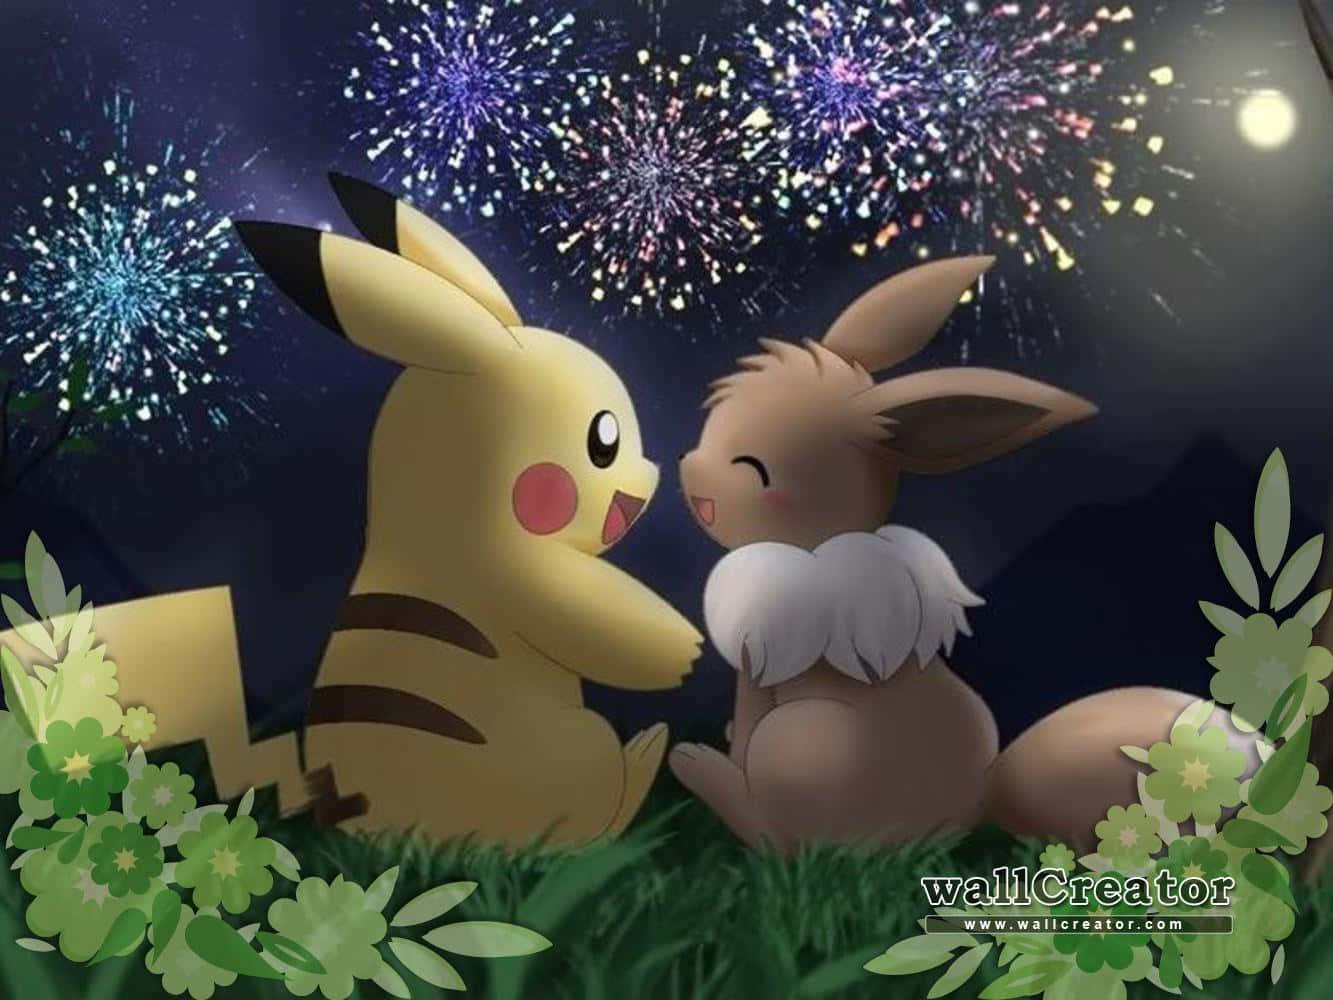 "The Cutest Couple in Town: Pikachu and Eevee" Wallpaper